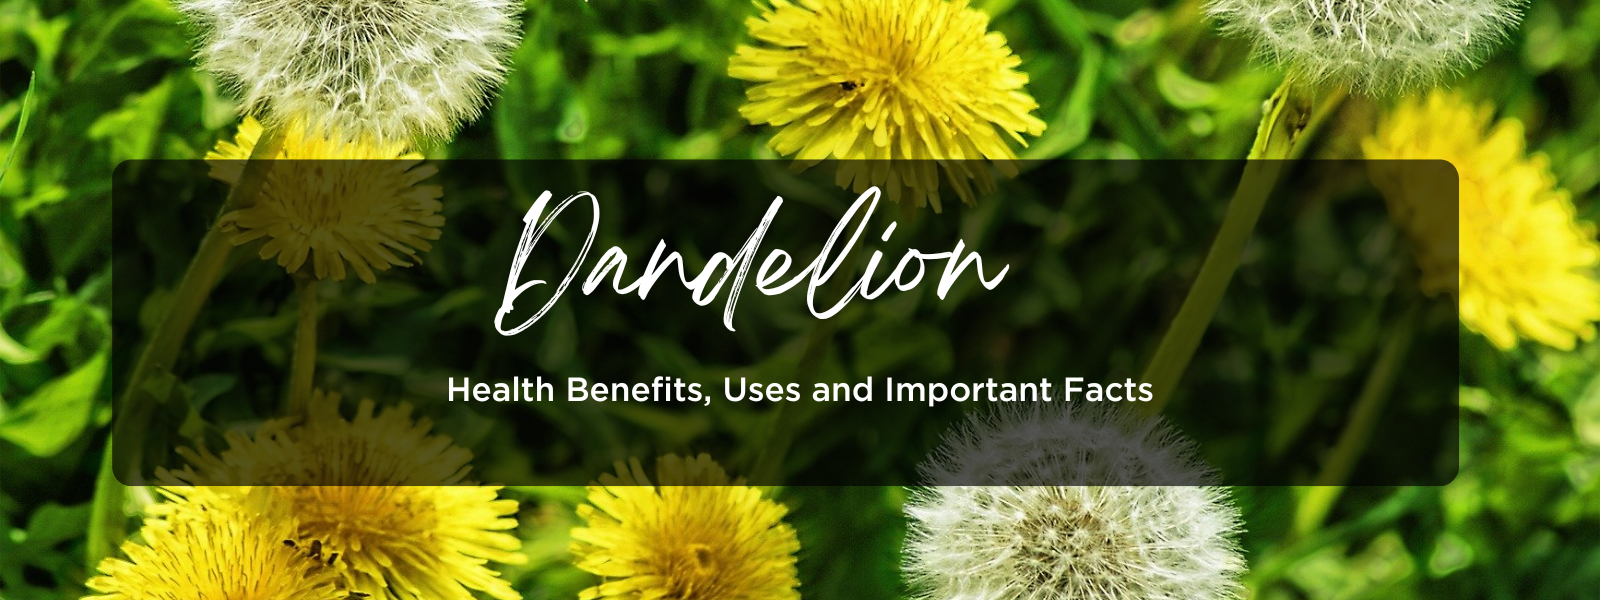 Dandelion: Health Benefits, Uses and Important Facts